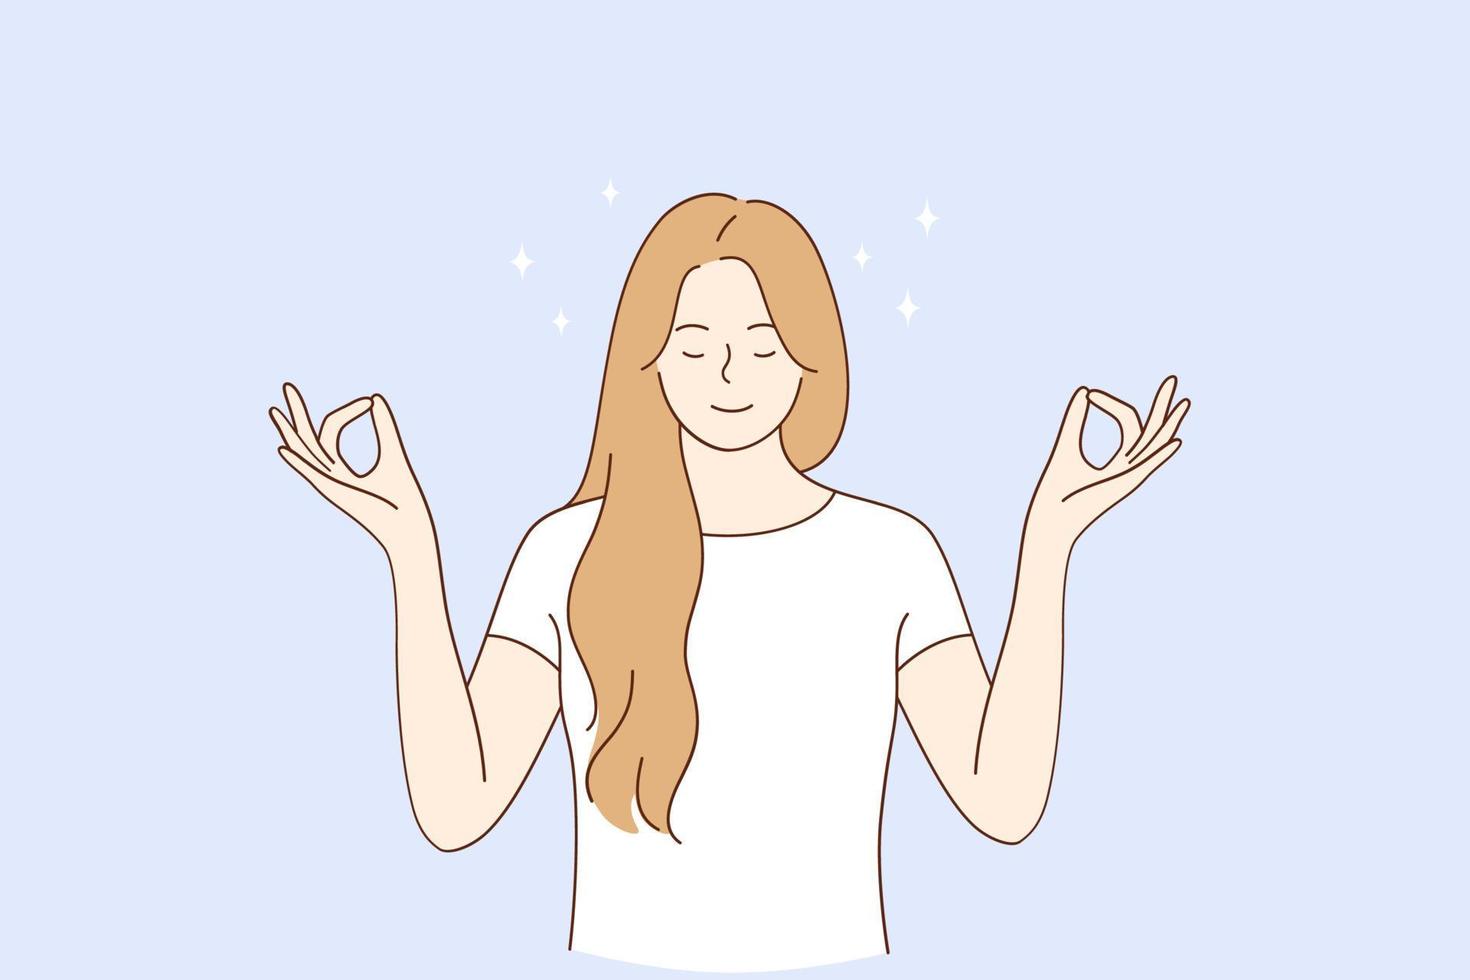 Healthy lifestyle, meditation, yoga concept. Young blonde smiling woman keeping eyes closed and meditating practicing peace of mind, keeping fingers in mudra gesture illustration vector